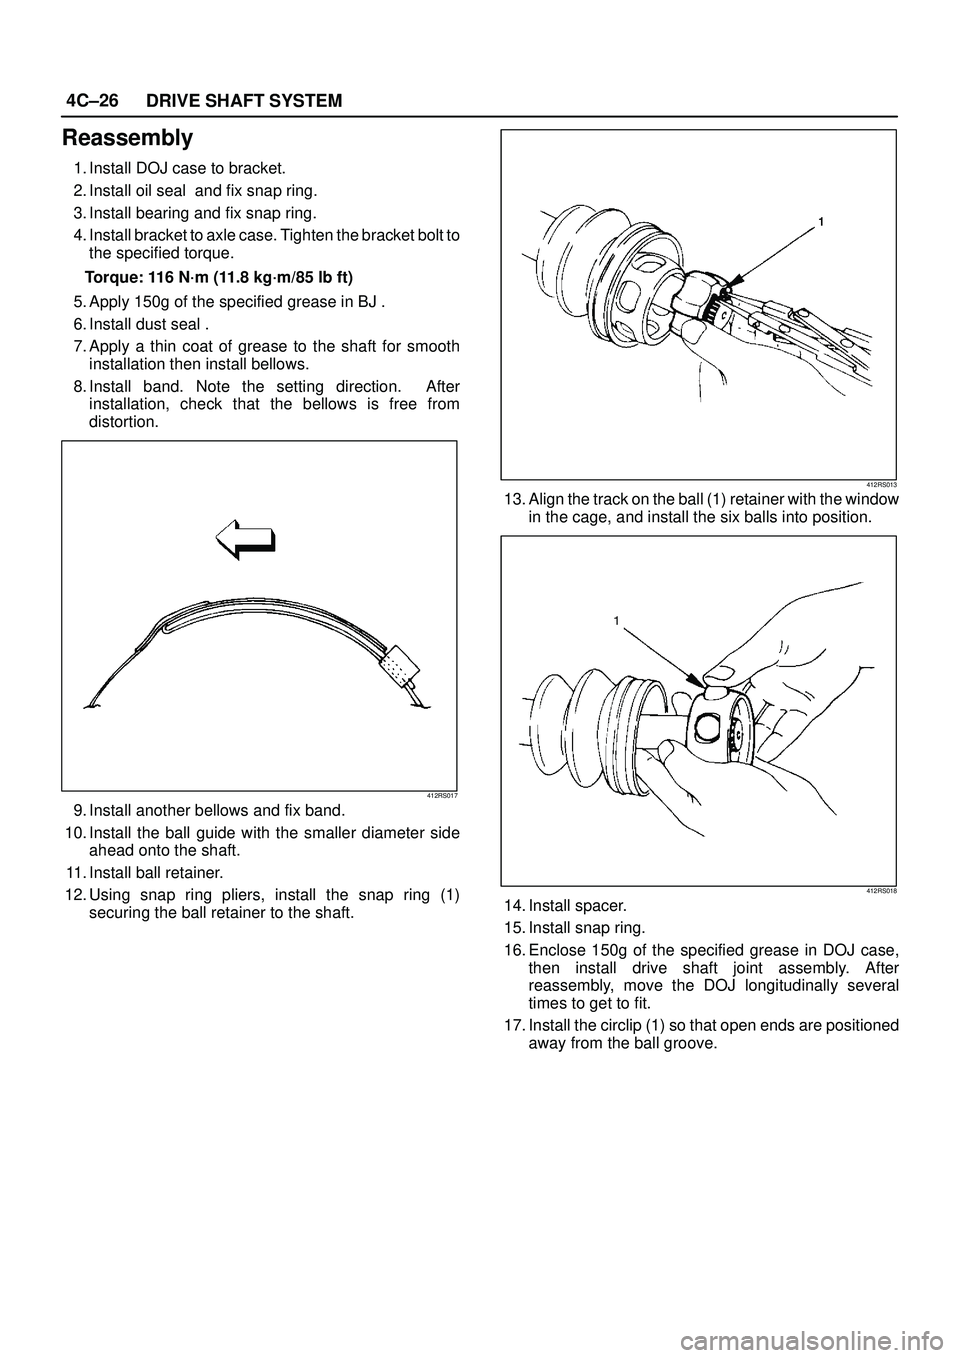 ISUZU TROOPER 1998  Service Repair Manual 4C±26
DRIVE SHAFT SYSTEM
Reassembly
1. Install DOJ case to bracket.
2. Install oil seal  and fix snap ring.
3. Install bearing and fix snap ring.
4. Install bracket to axle case. Tighten the bracket 